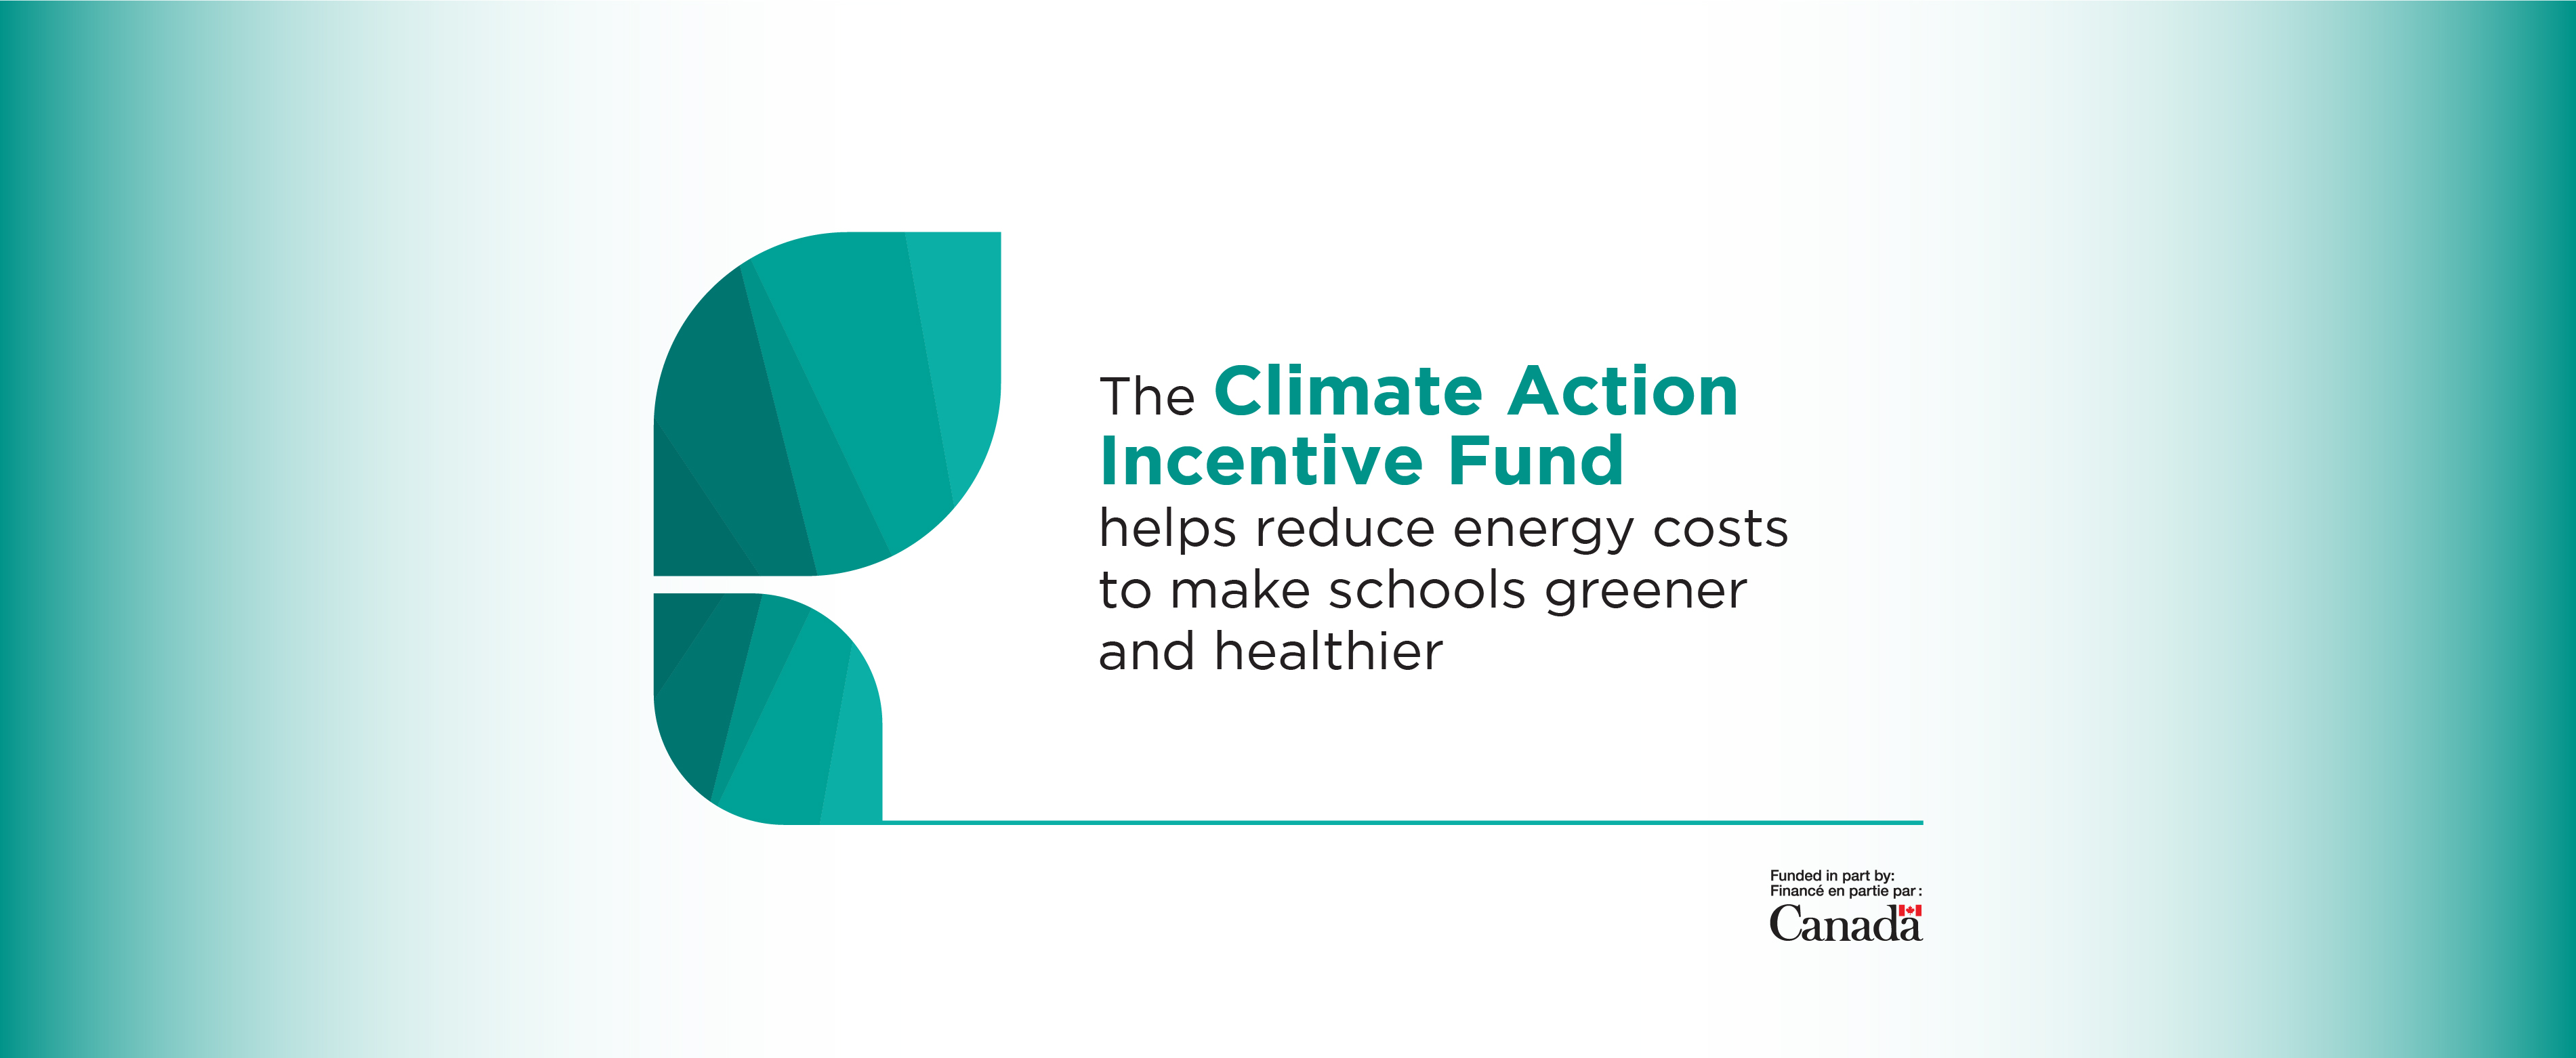 Climate Action Incentive Fund: helps reduce energy costs to make schools greener and healthier